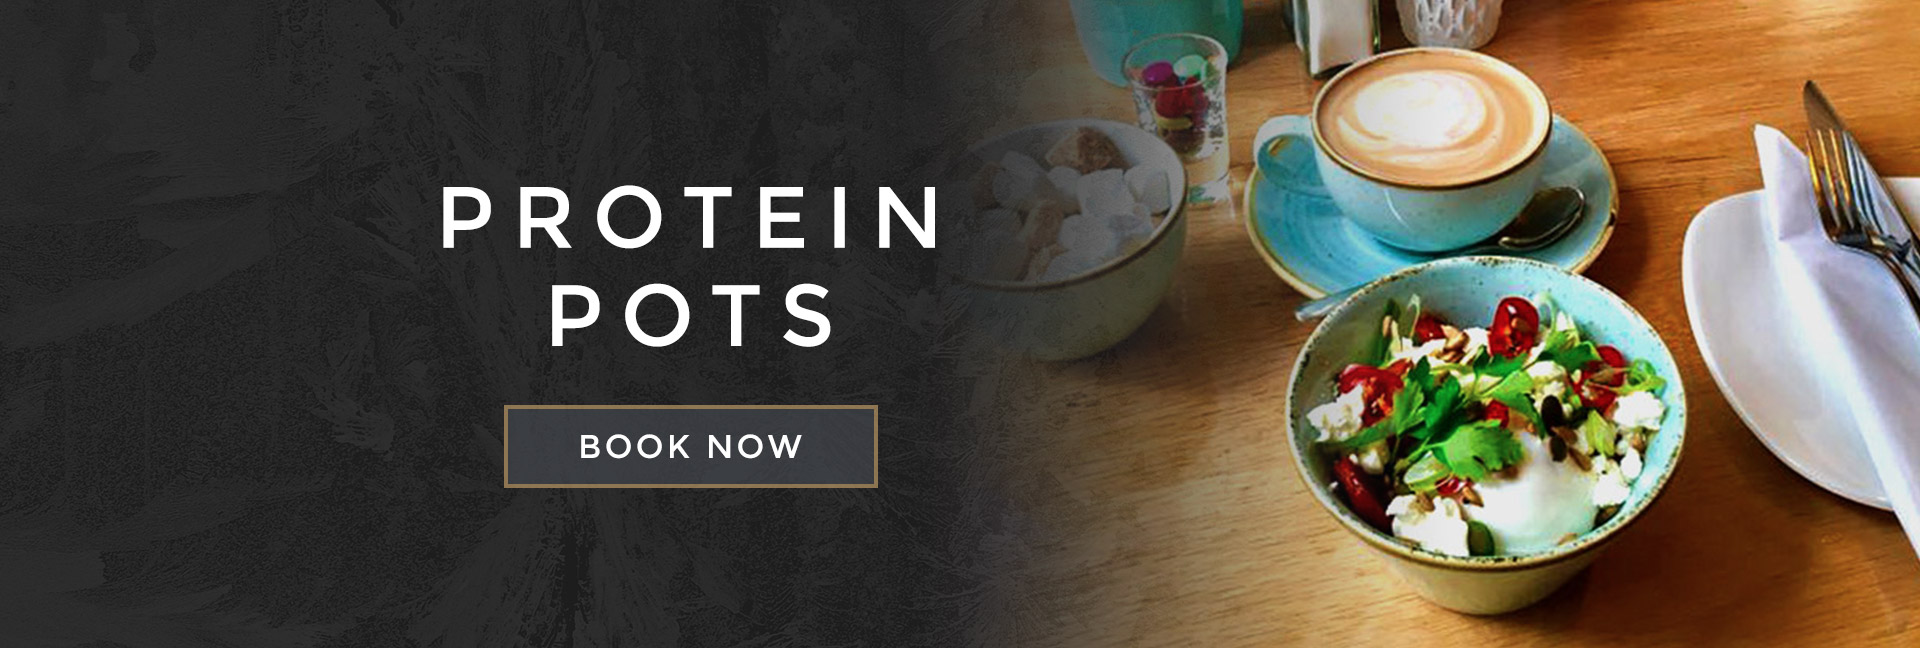 Protein pots at All Bar One - Book your table